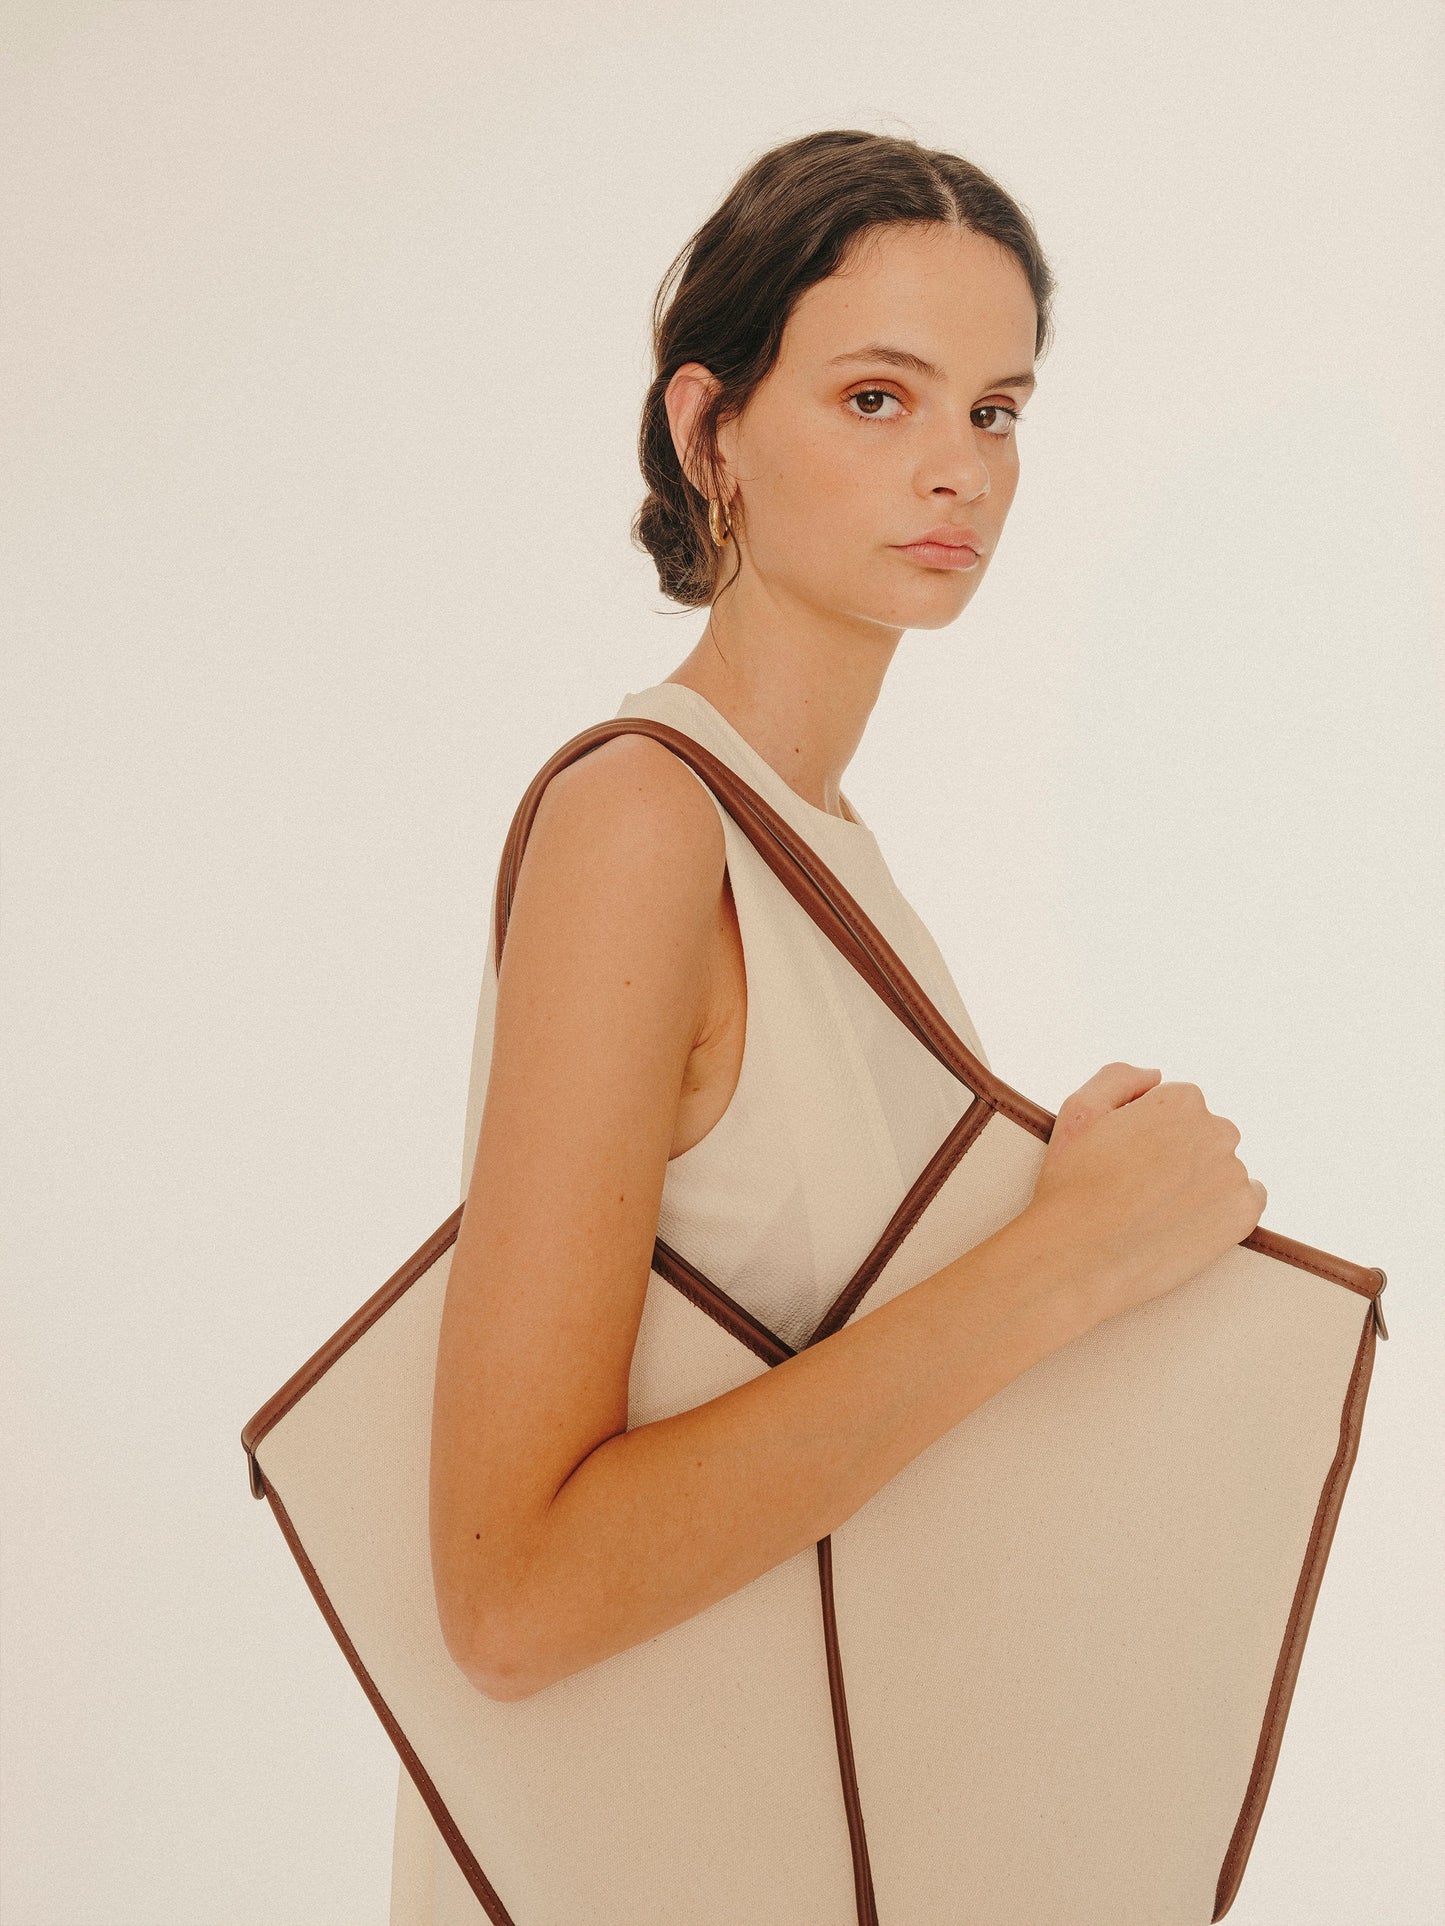 CALELLA - Leather-trimmed Organic Cotton Tote Bag